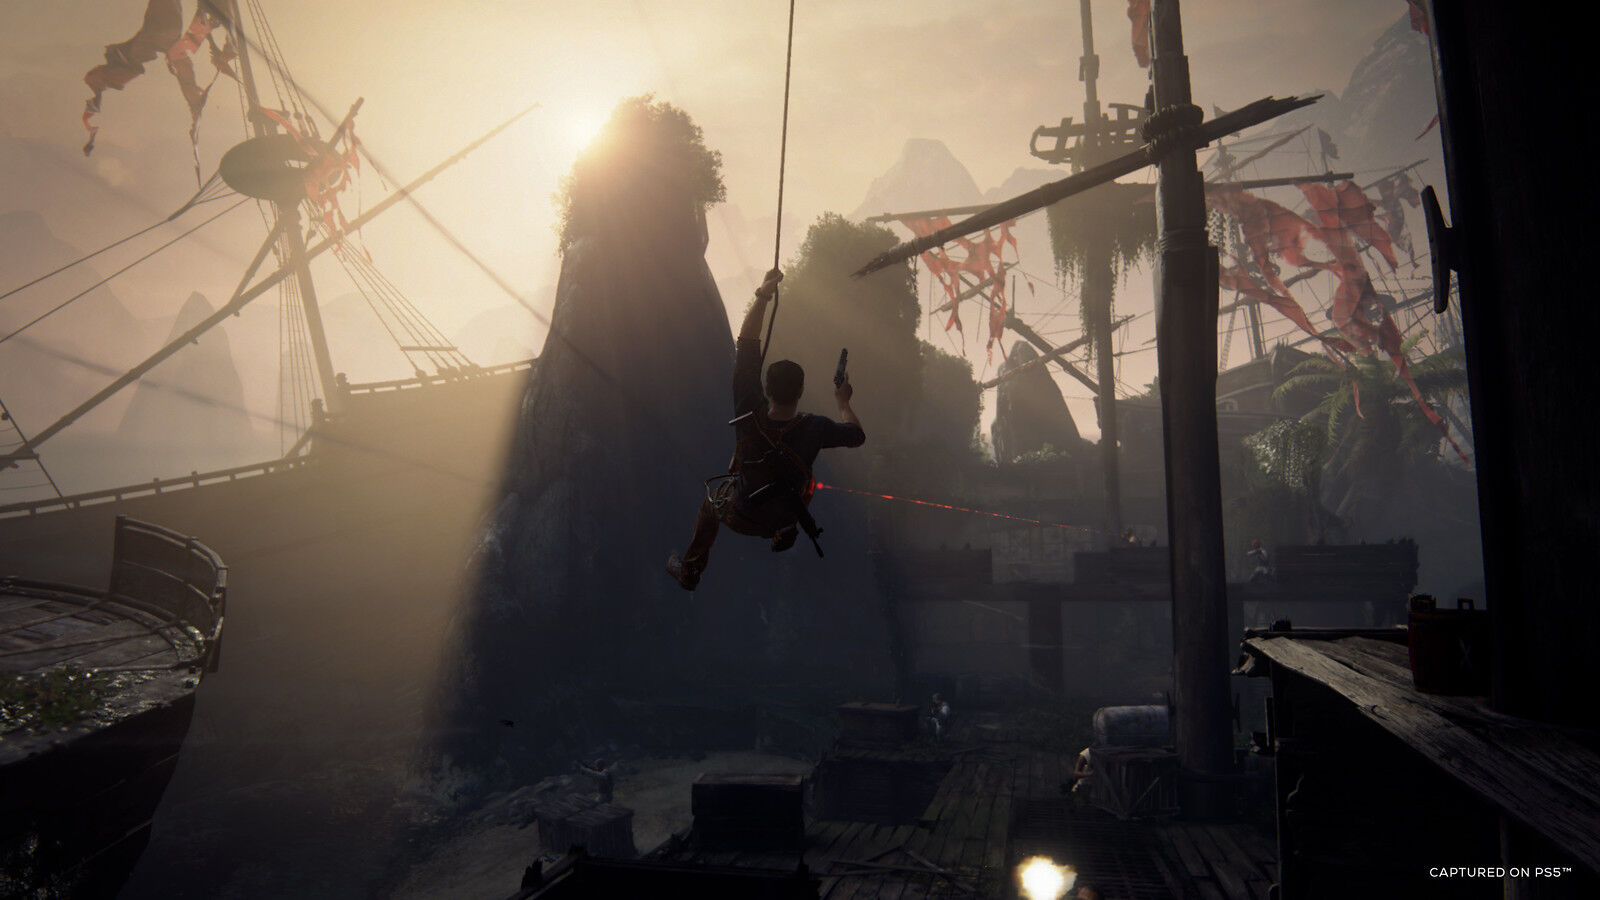 Uncharted: Legacy of Thieves Collection' PC version impressions